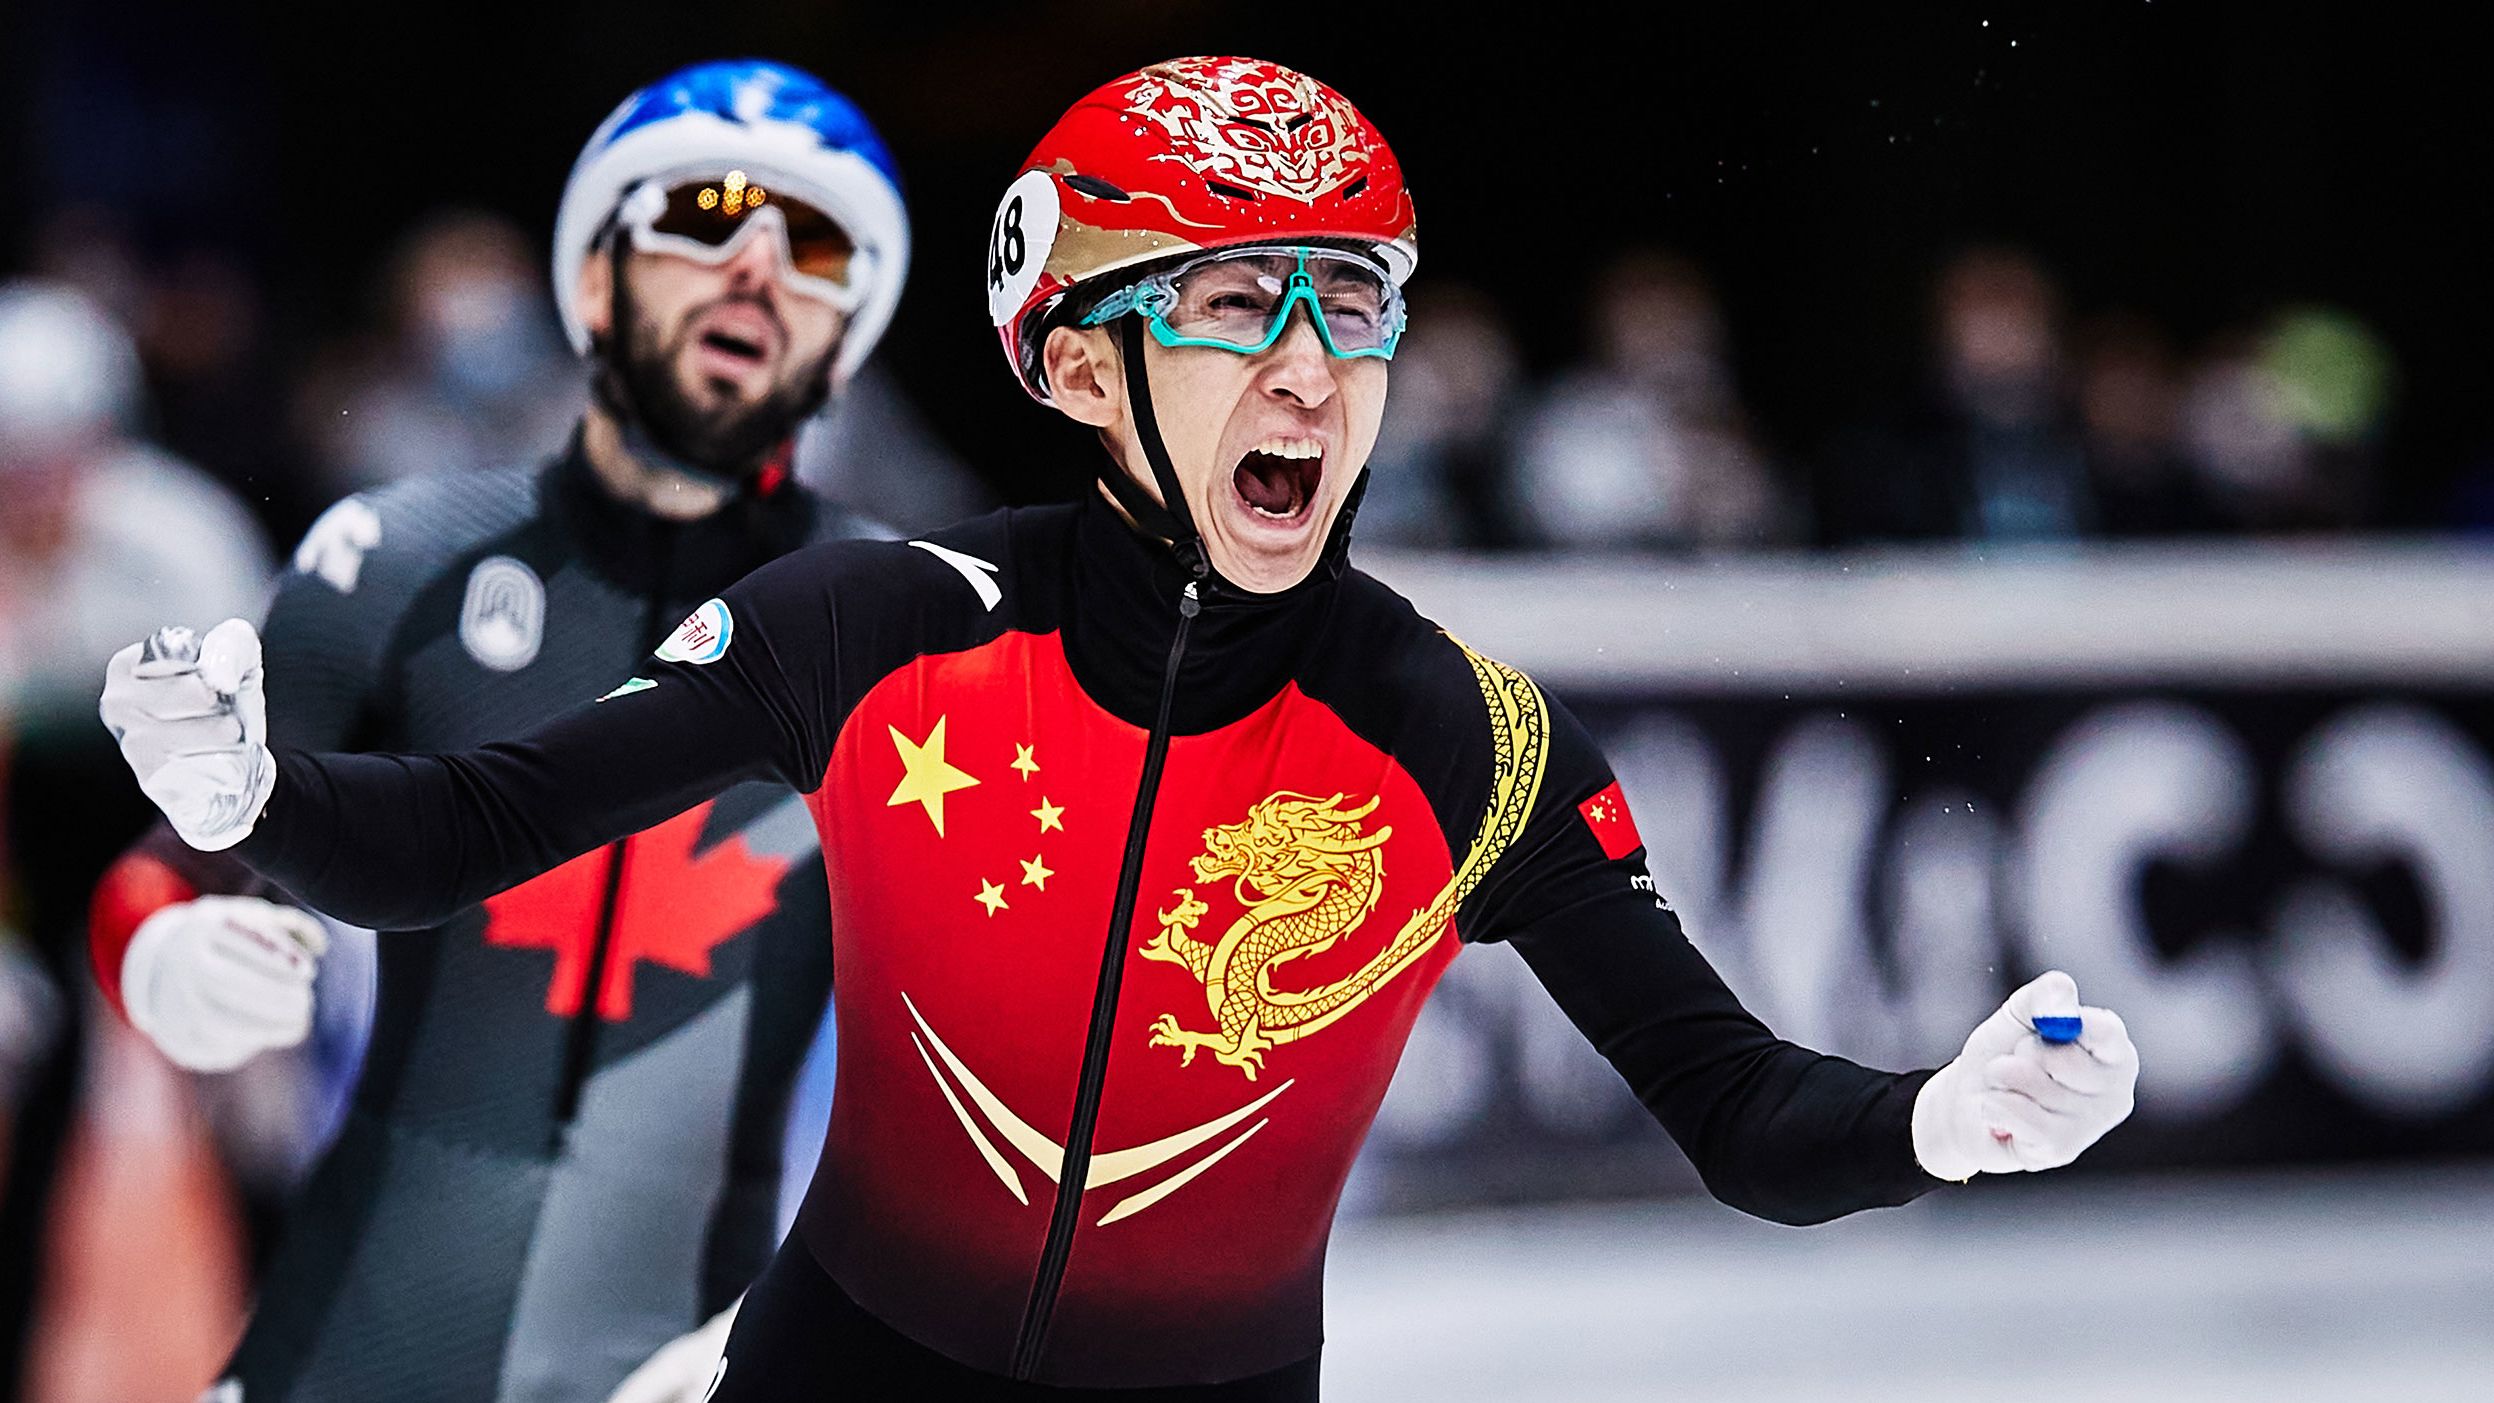 <strong>Wu Dajing (China):</strong> Wu won China's only gold medal in the 2018 Olympics, breaking the world record in the 500-meter short-track race. He finished with a time of 39.584 seconds, becoming just the second person in history to skate the race under 40 seconds. Wu, 27, has won four Olympic medals in his career, including a silver in the 500 in 2014. 